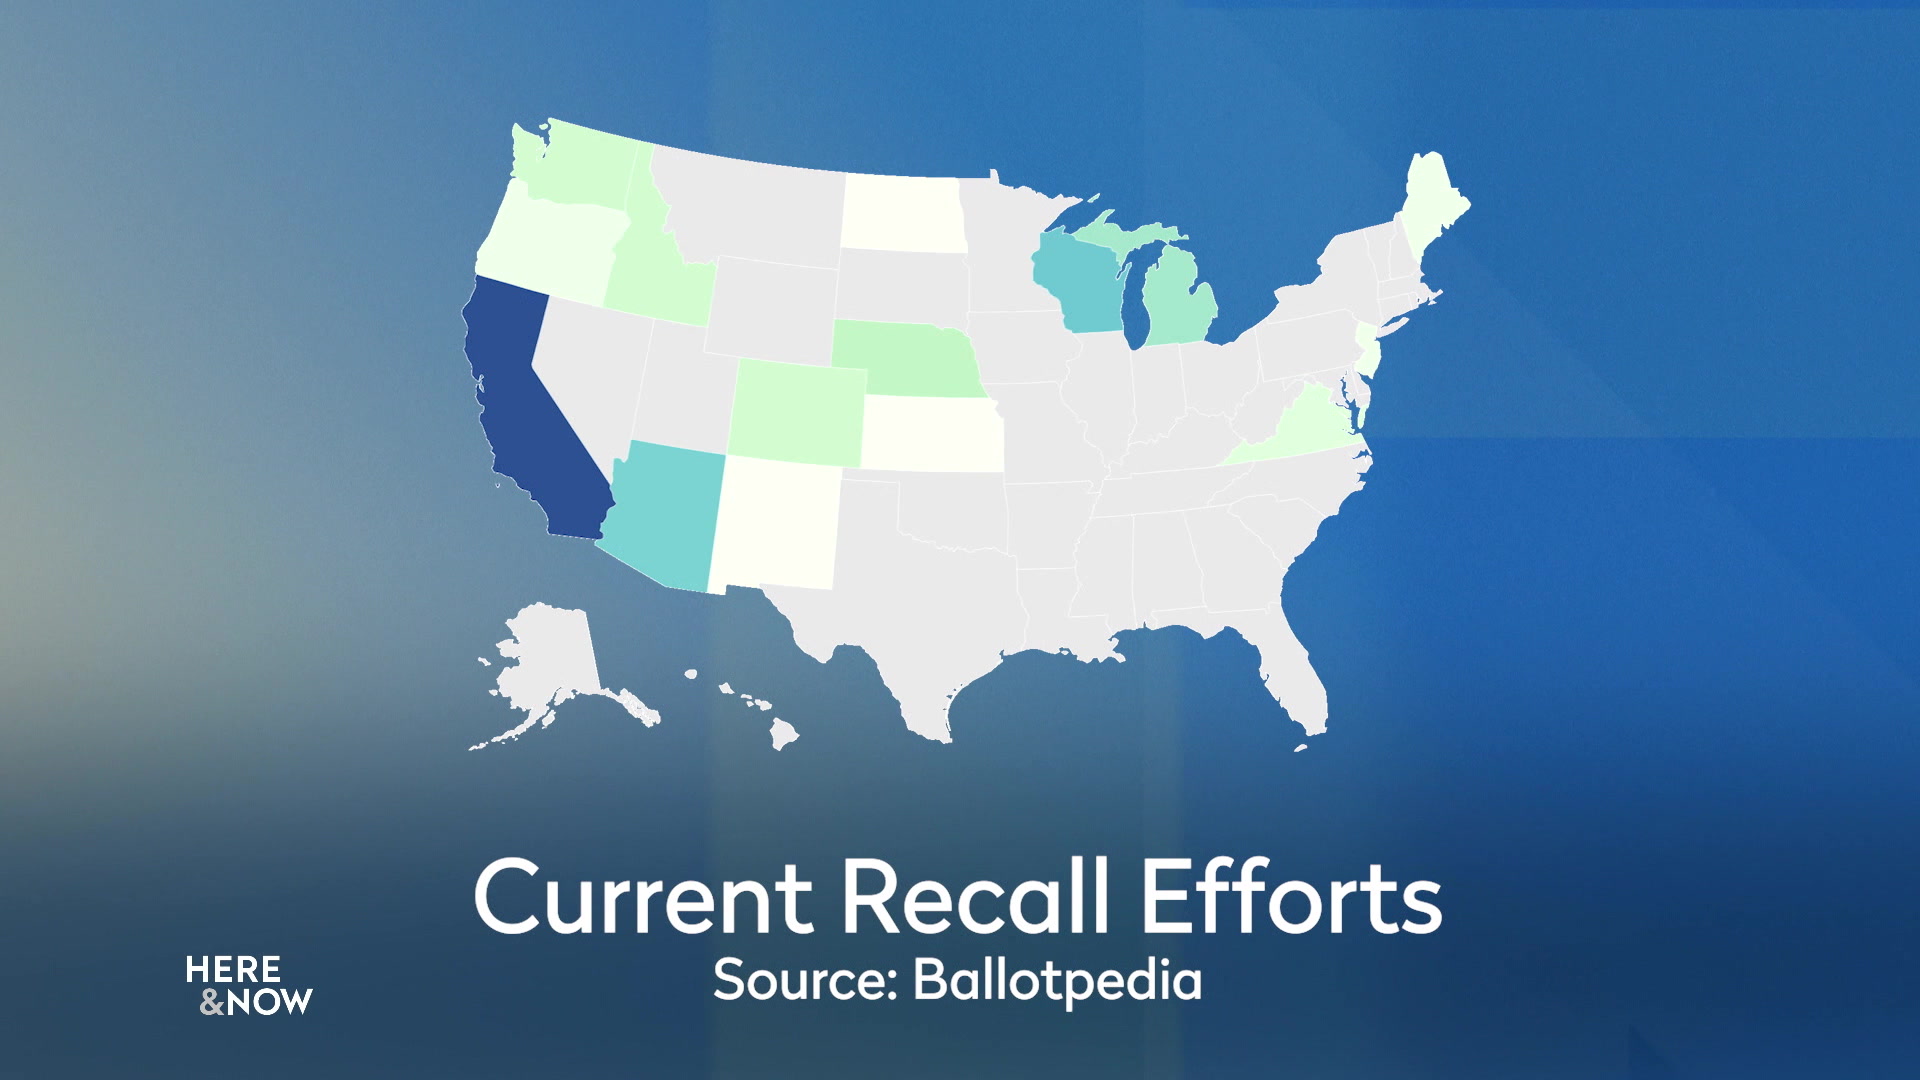 A map shows states in different shades of color to illustrated the number of recalls in each.